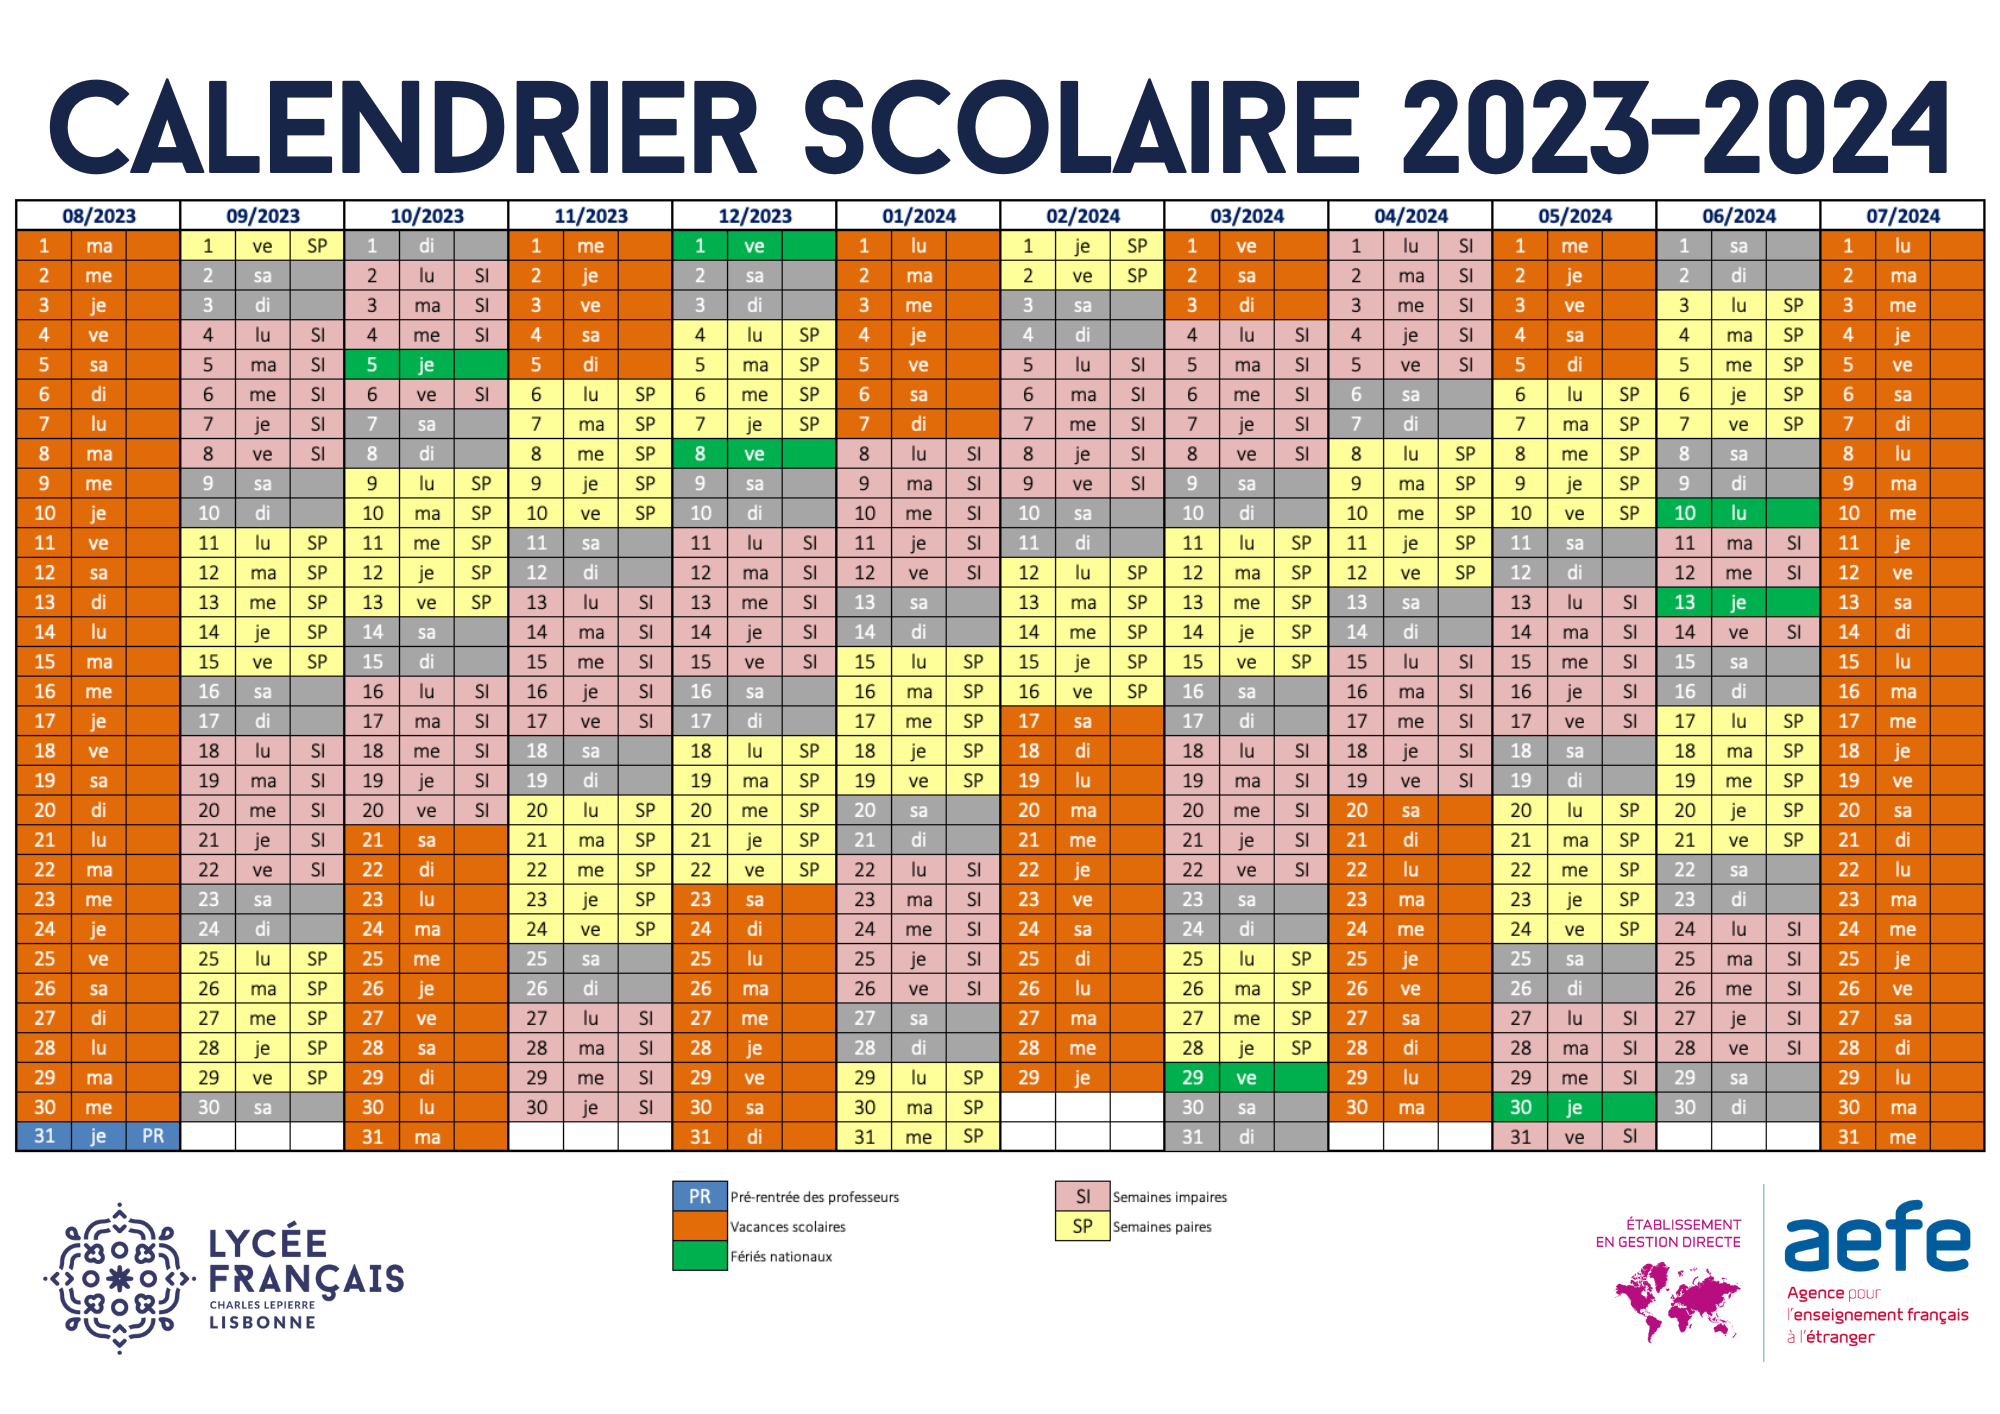 https://www.lfcl.pt/wp-content/uploads/2023/05/Calendrier-scolaire-2023-2024-Valide-2.png